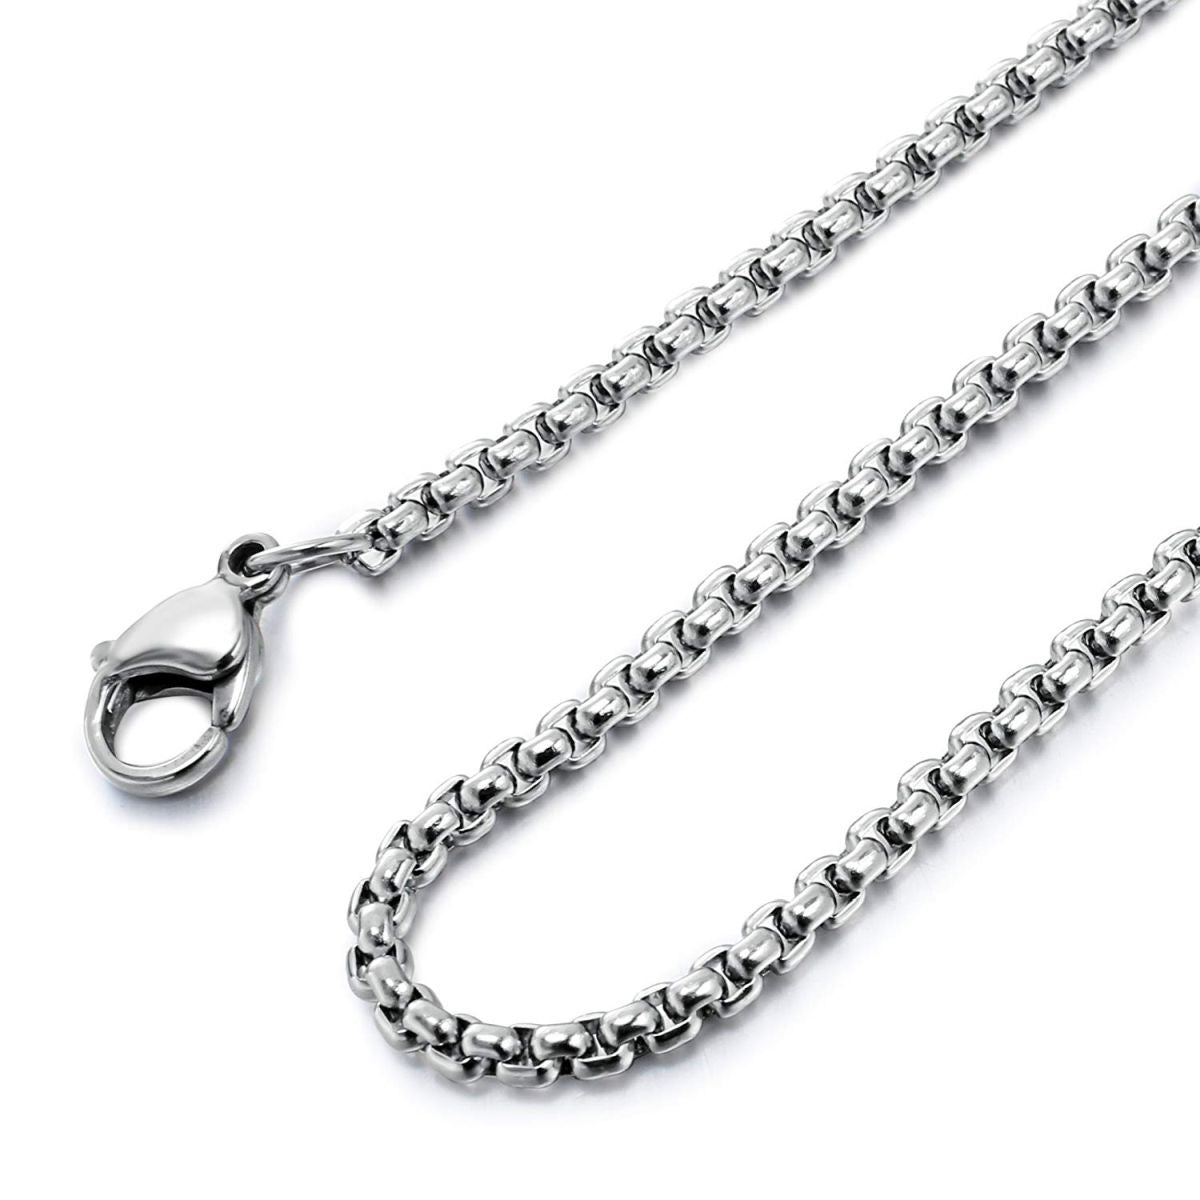 BOSS Chain Link Men's Necklace | 0124682 | Beaverbrooks the Jewellers